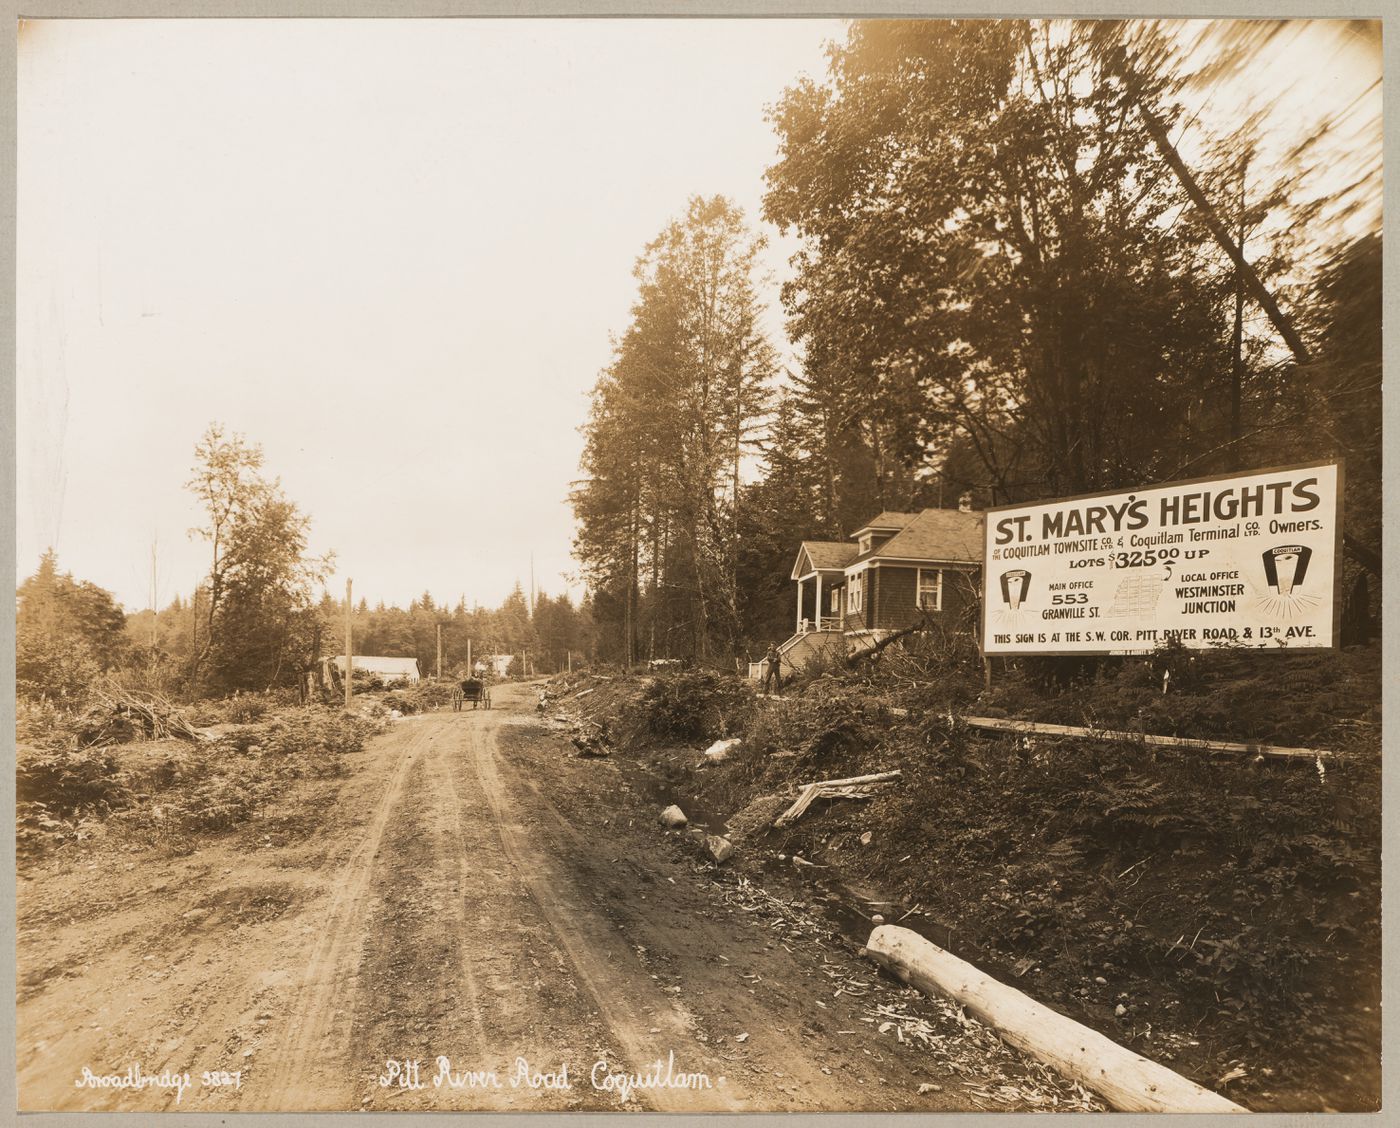 View of Pitt River Road showing St. Mary's Heights housing development (now Mary Hill) with a model house [?] on the right, Coquitlam (now Port Coquitlam), British Columbia